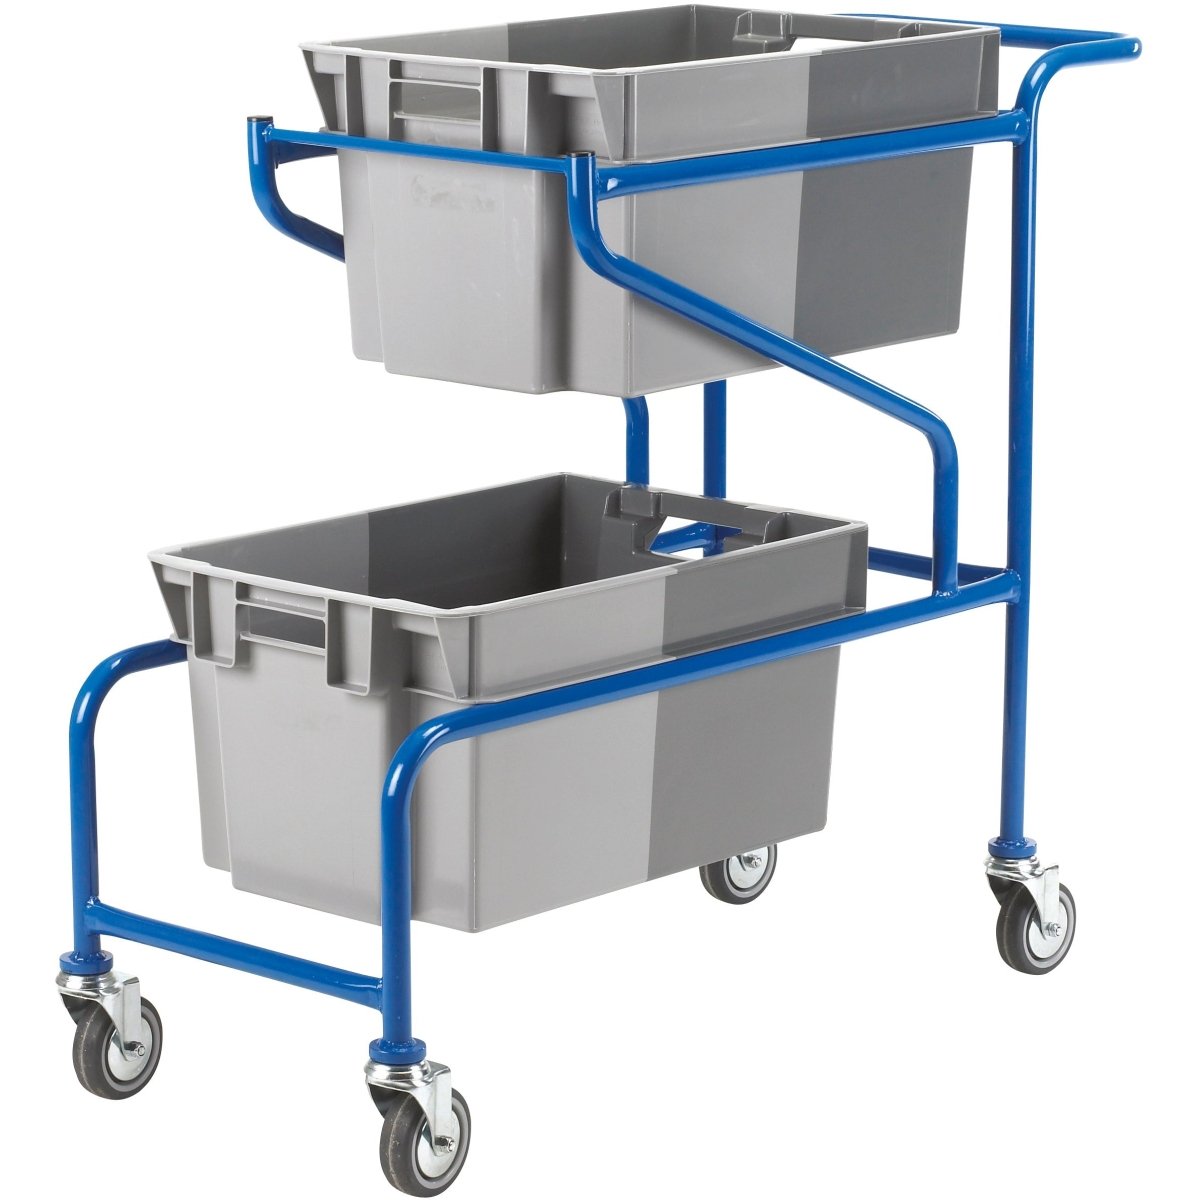 Loadtek Container Carrier Industrial Trolley - Warehouse Storage Products